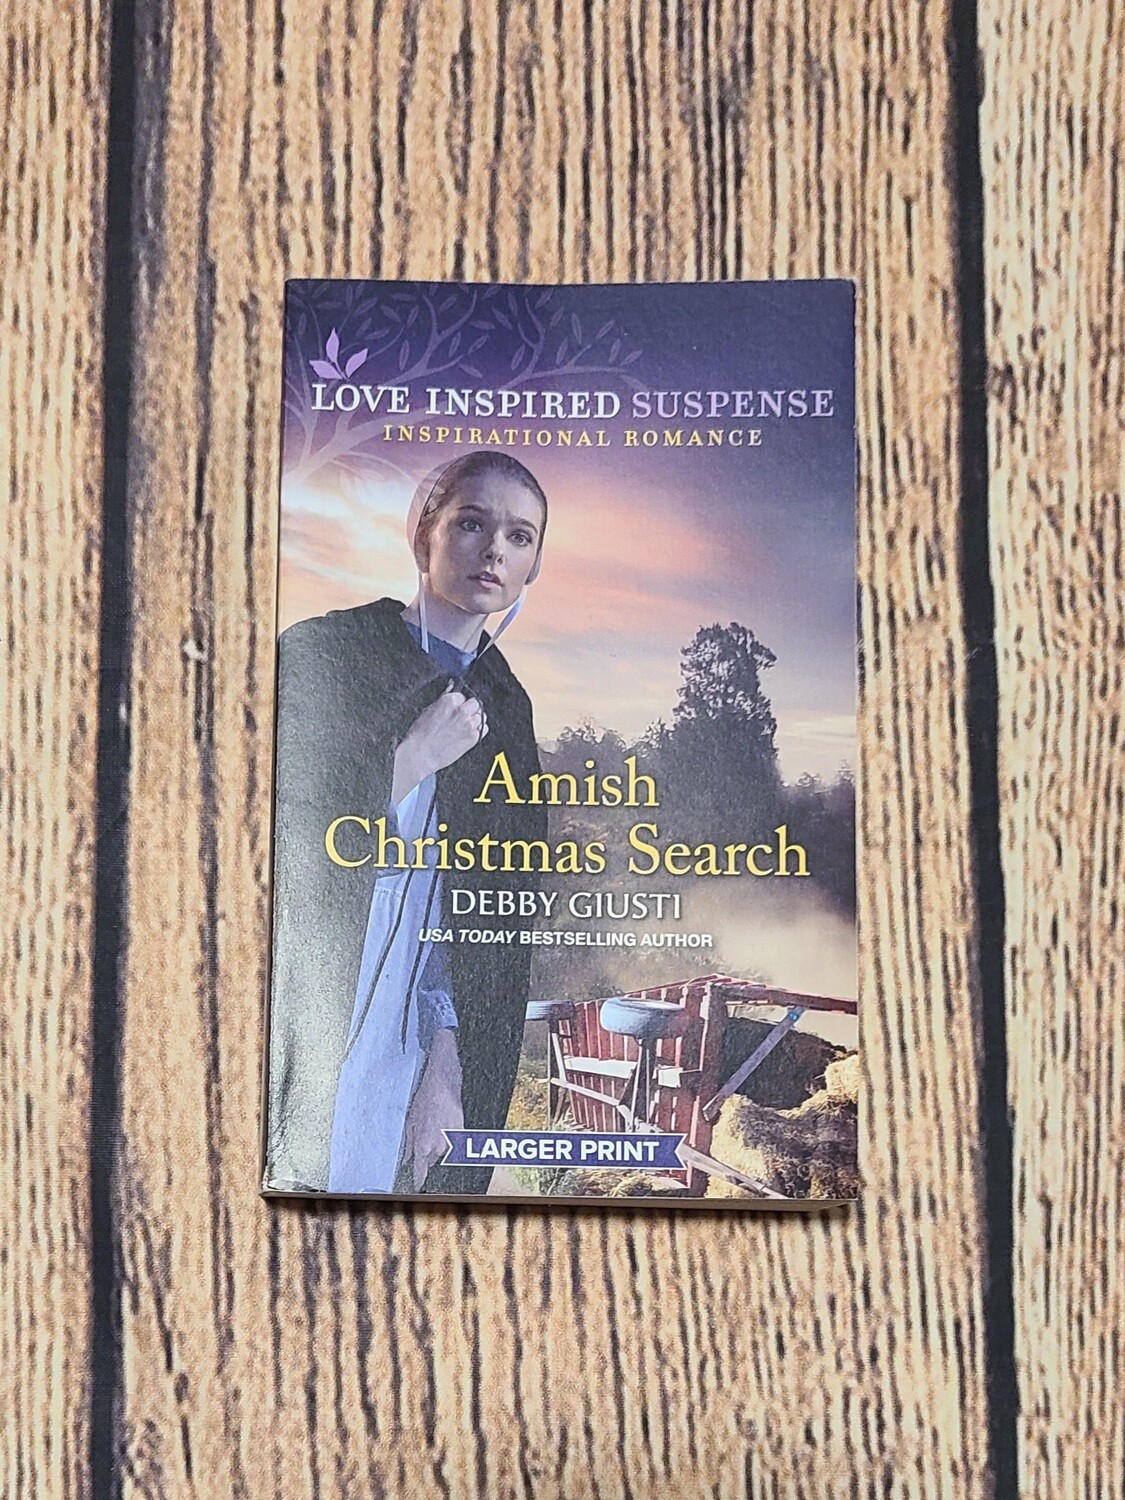 Amish Christmas Search by Debby Giusti - Larger Print - Great Condition